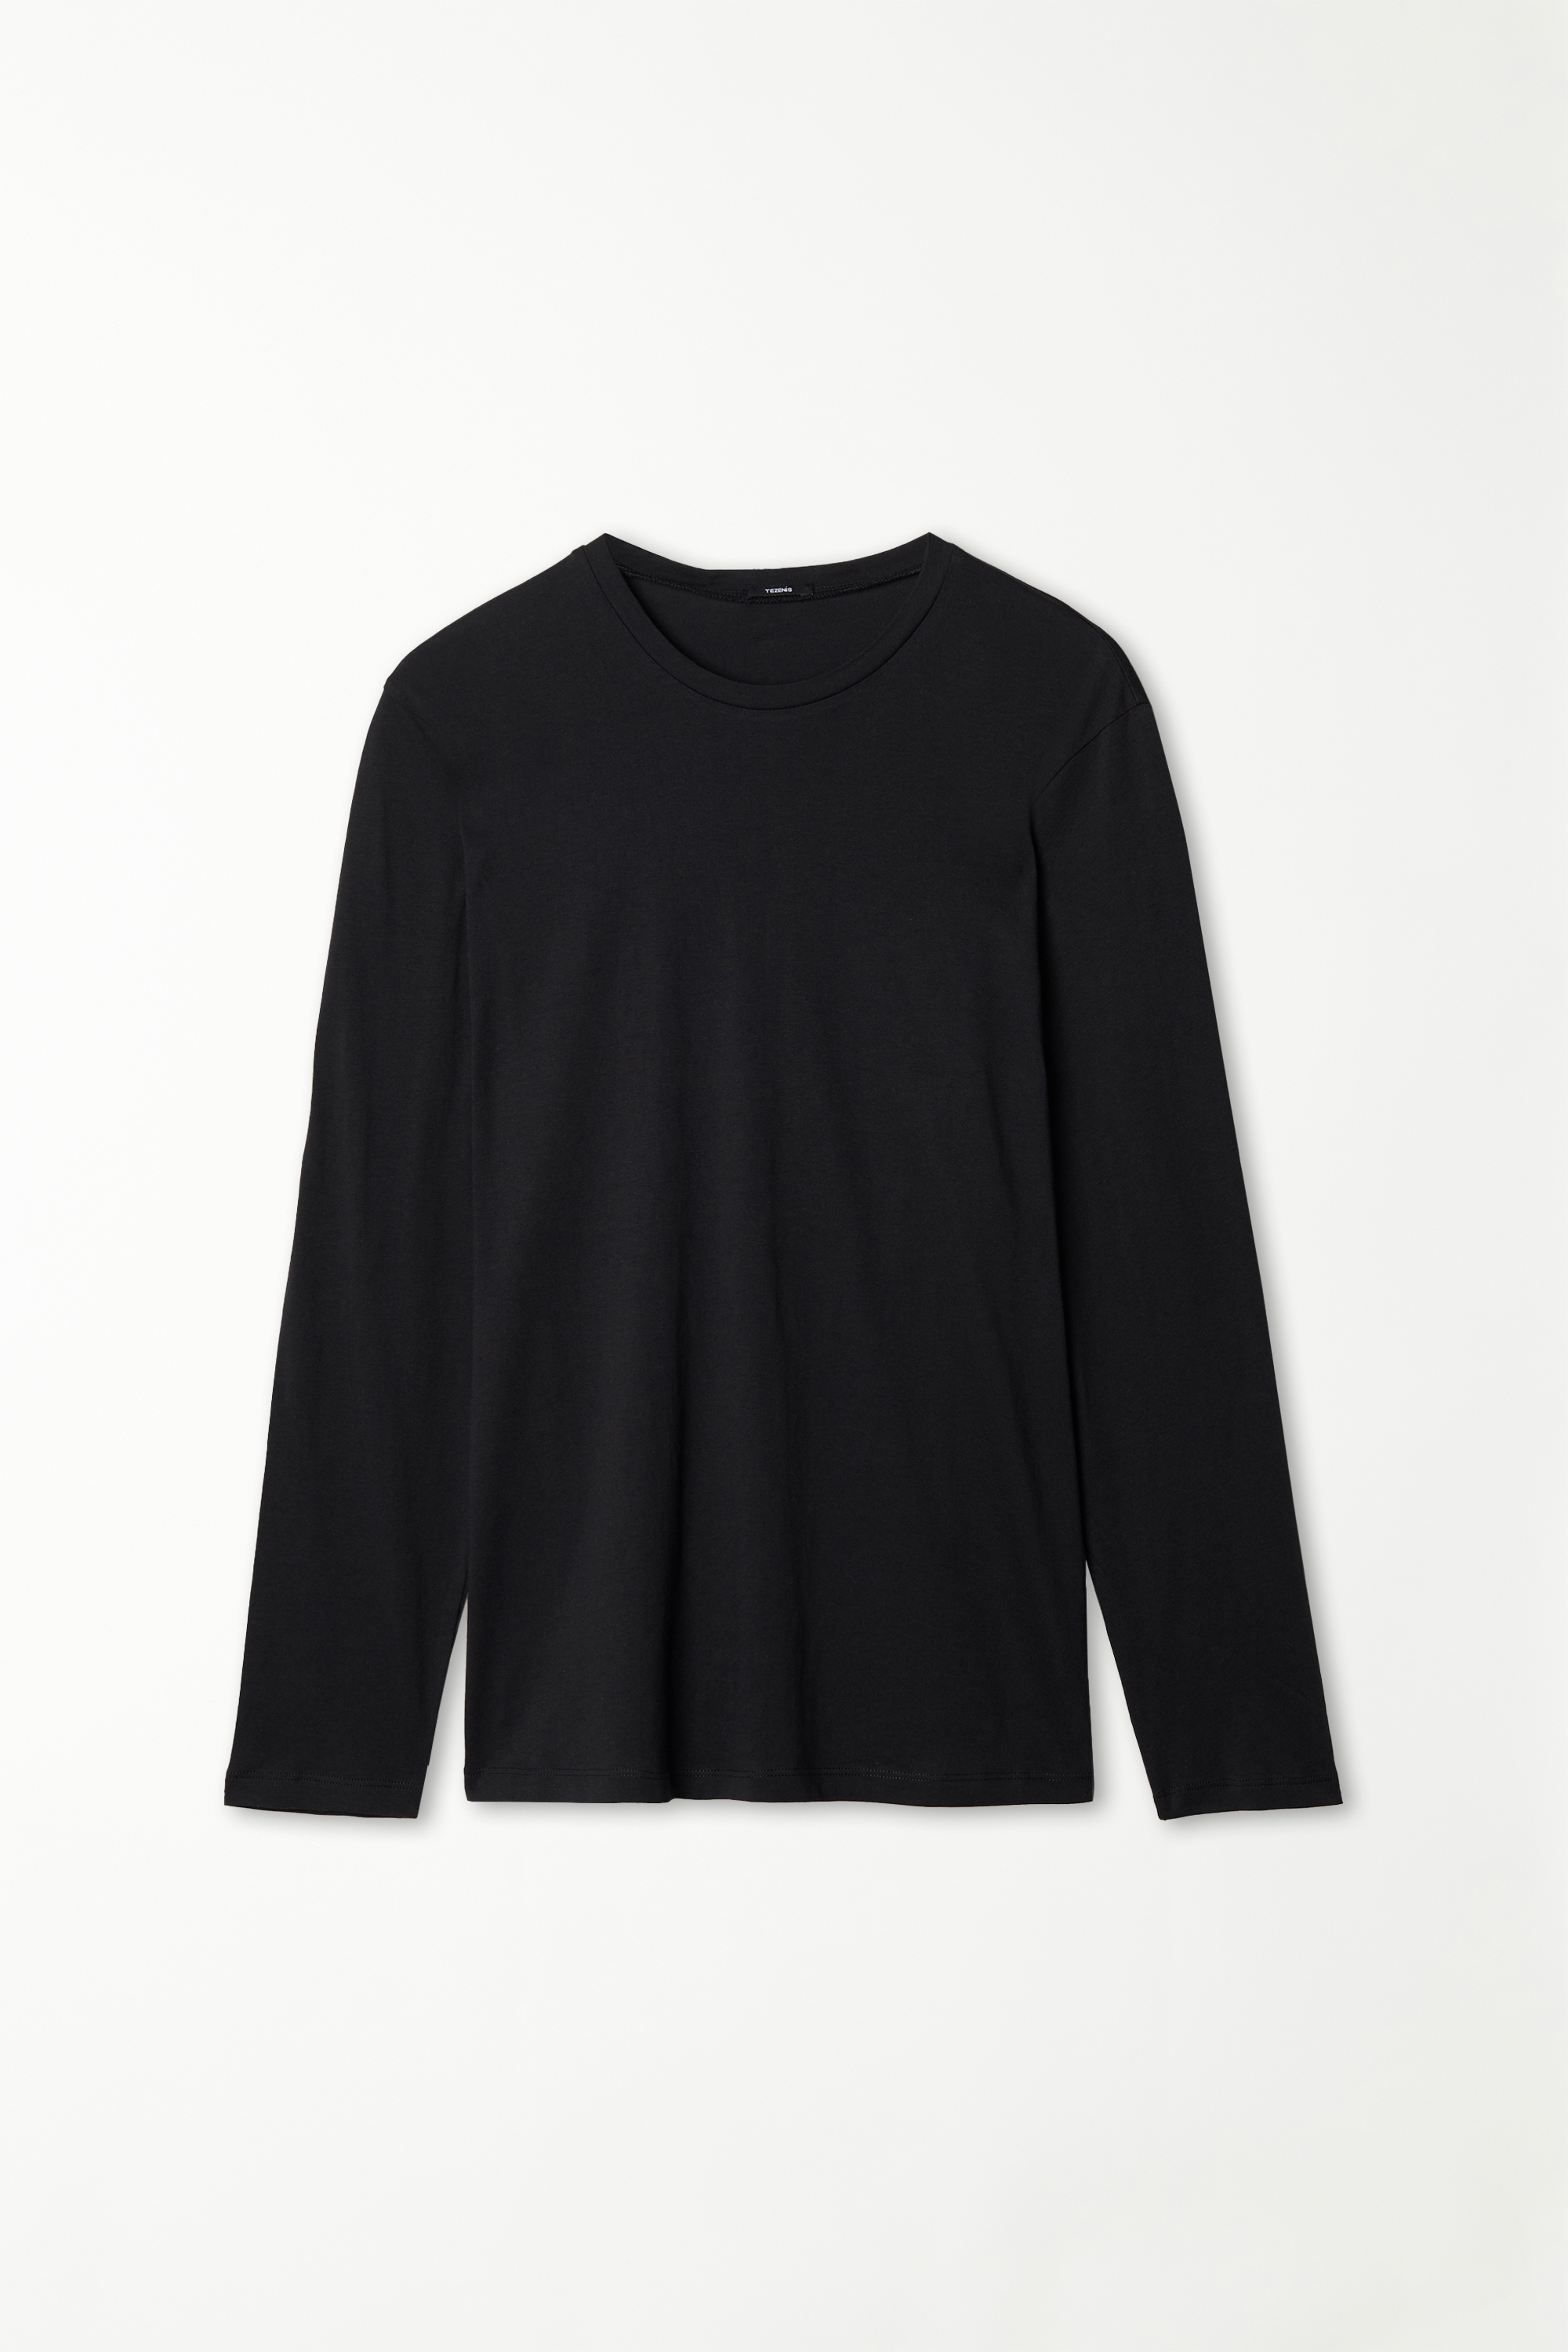 Long Sleeve Rounded Neck Cotton Top